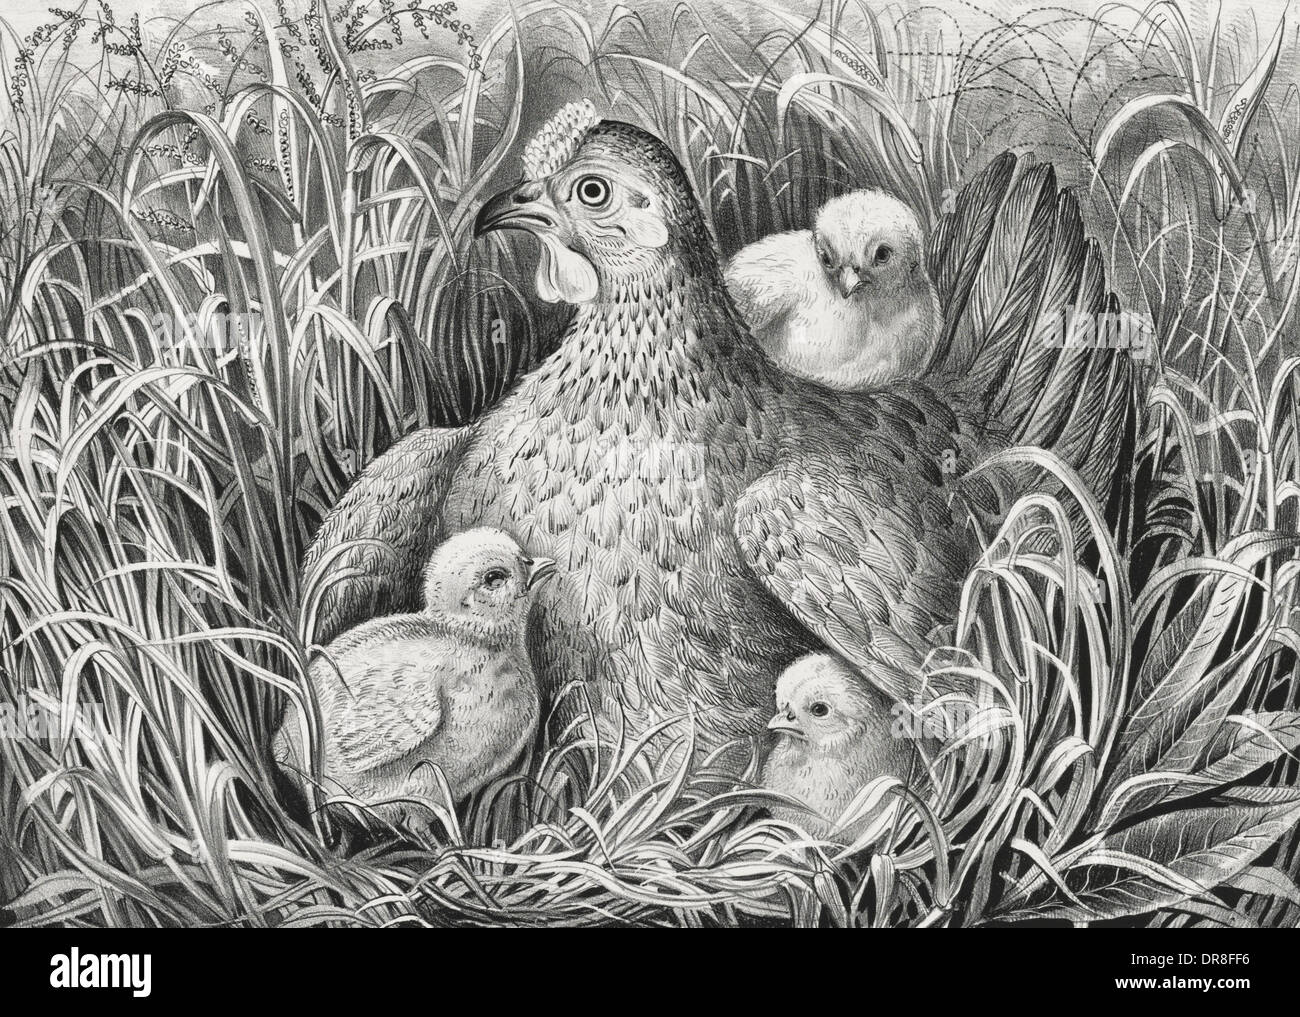 Mothers wing - little chicks sheltering under hens wings Stock Photo